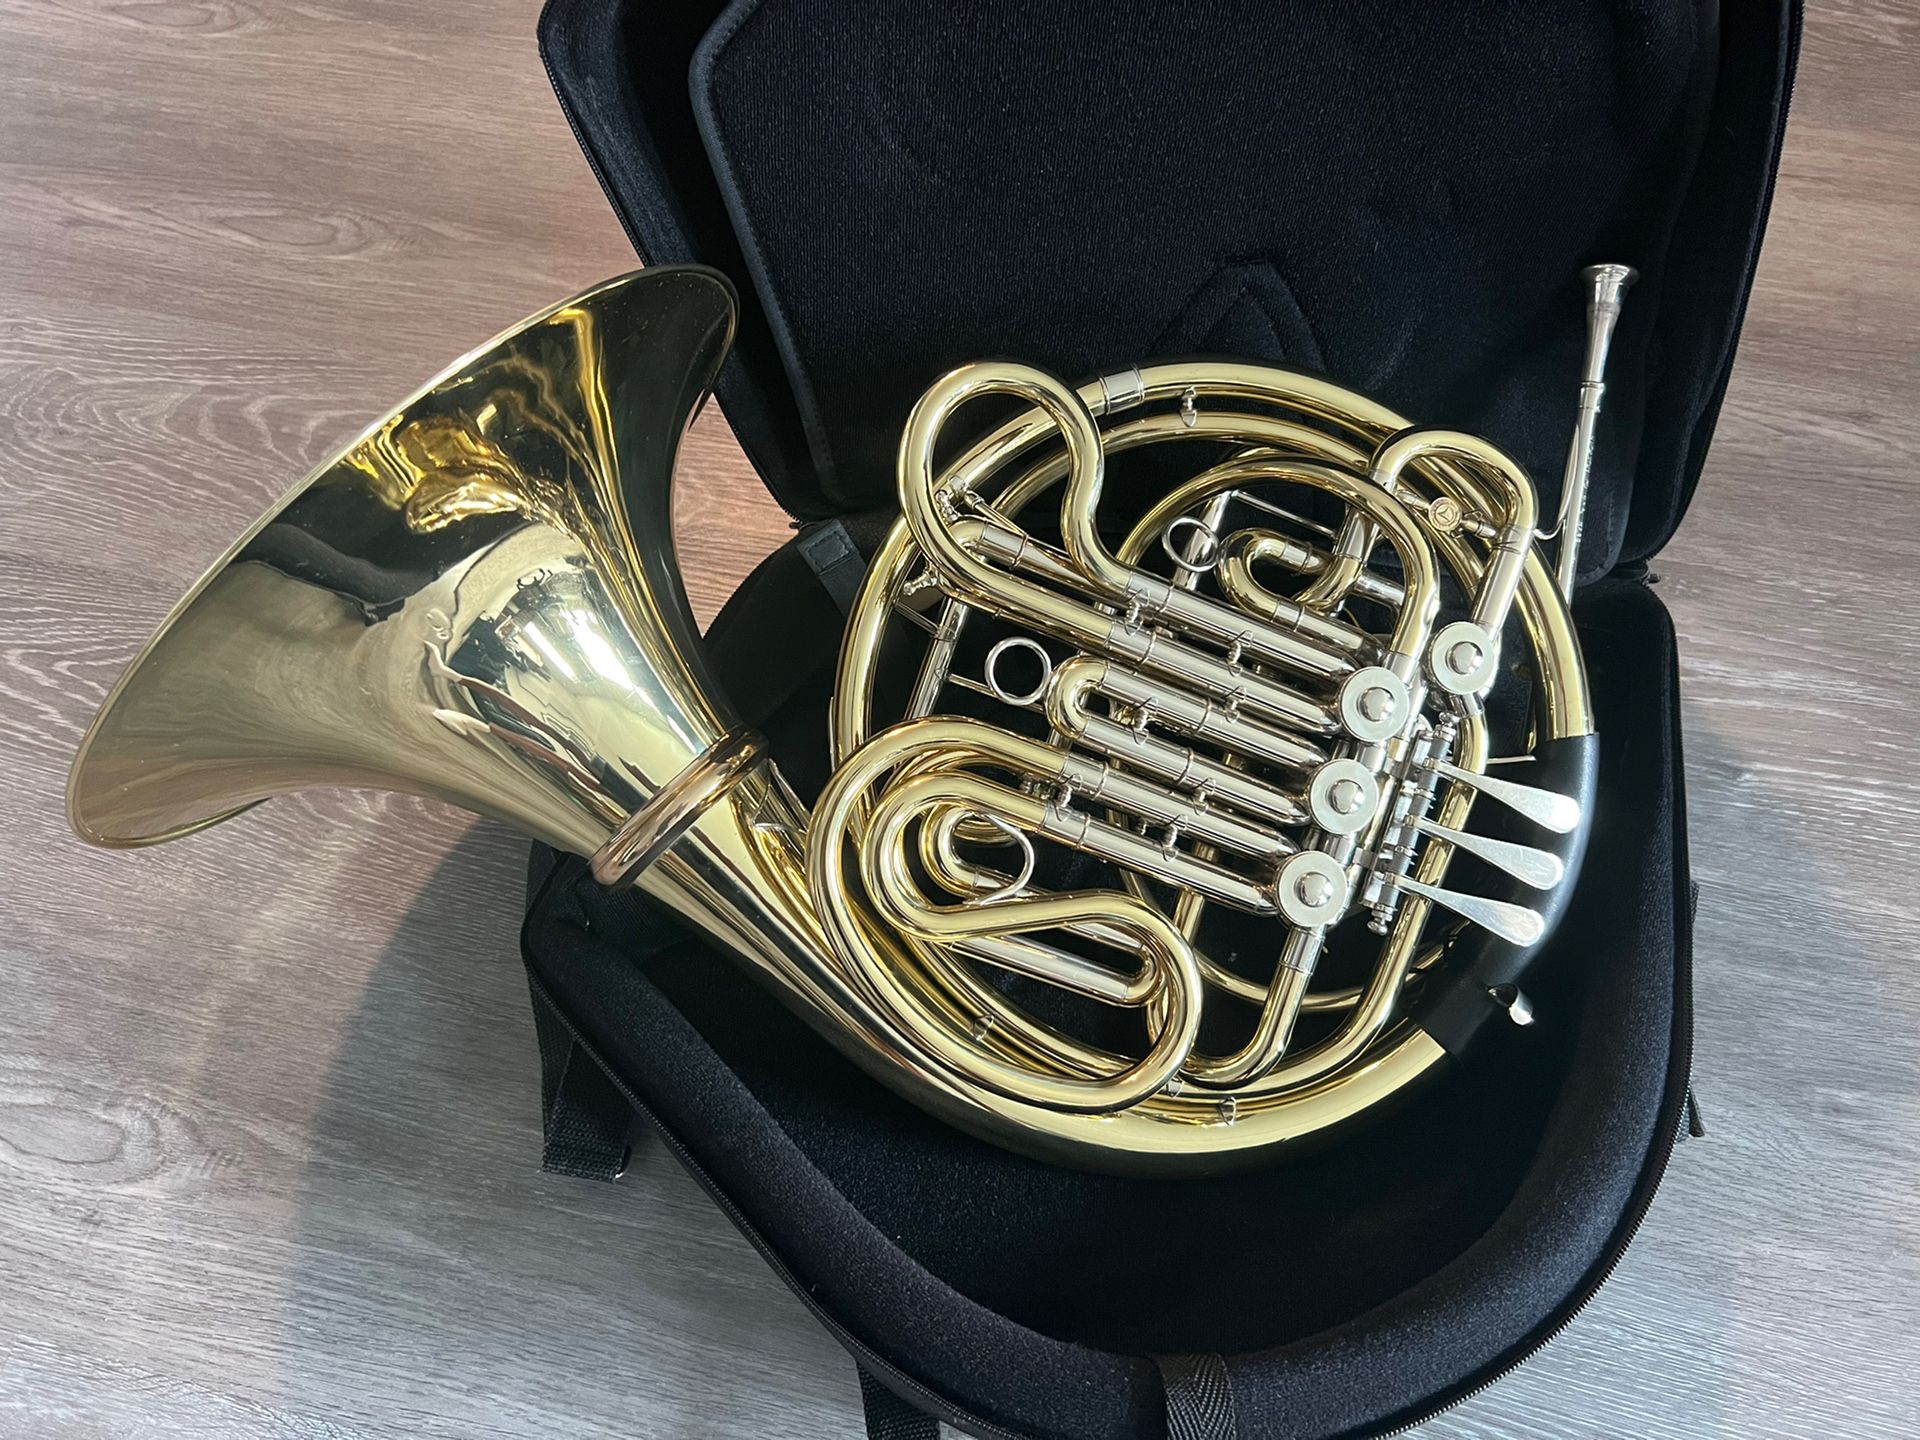 Holton H280 Double French Horn for Sale in Jersey City, NJ - OfferUp